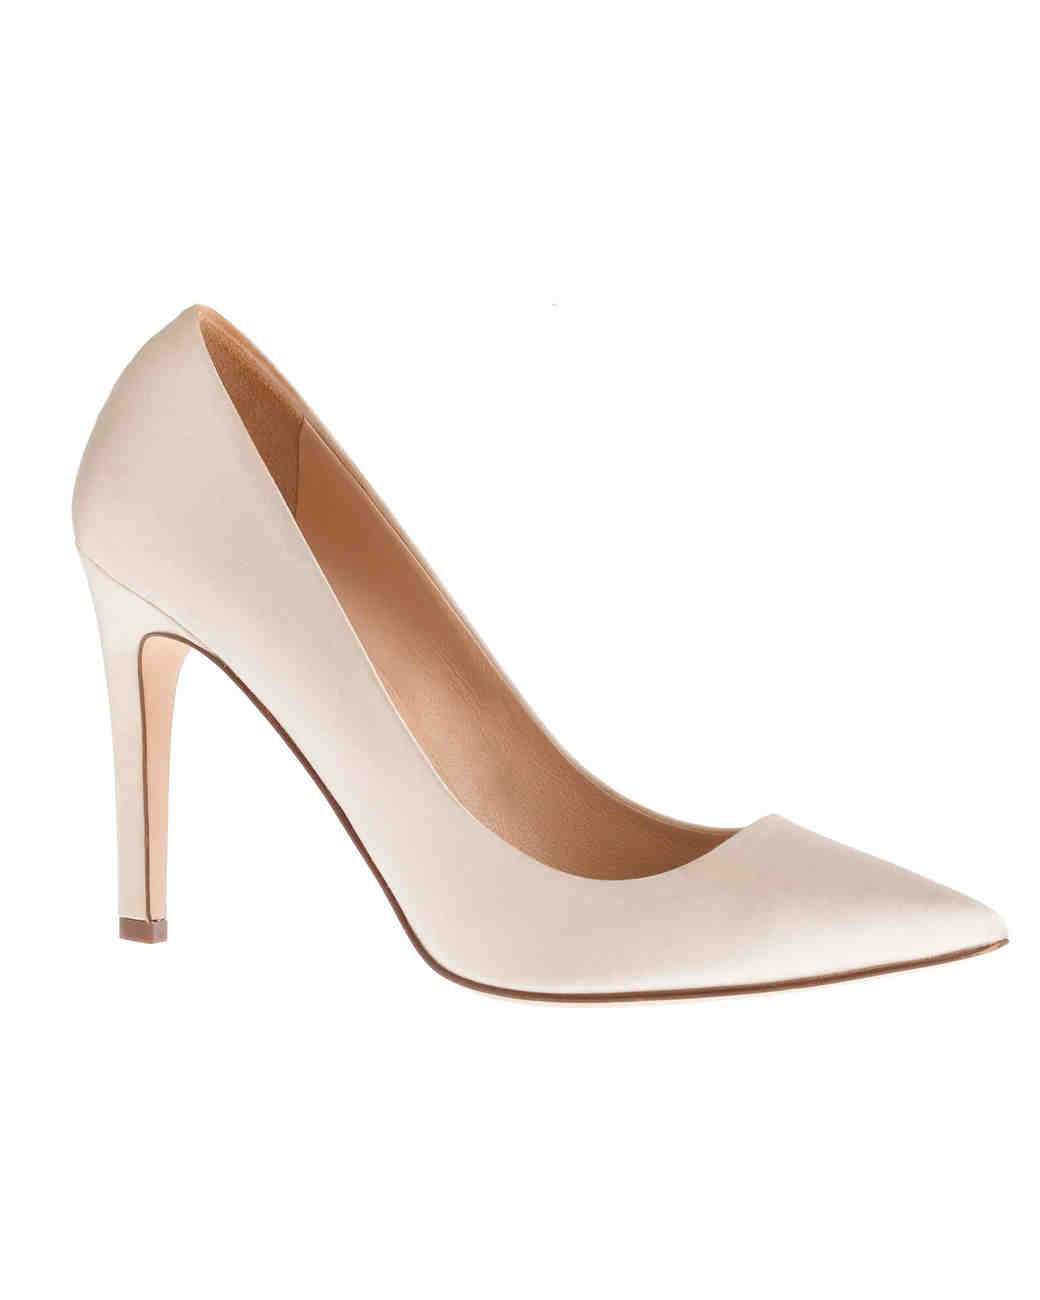 Jcrew Wedding Shoes
 36 Best Shoes for a Bride to Wear to a Fall Wedding